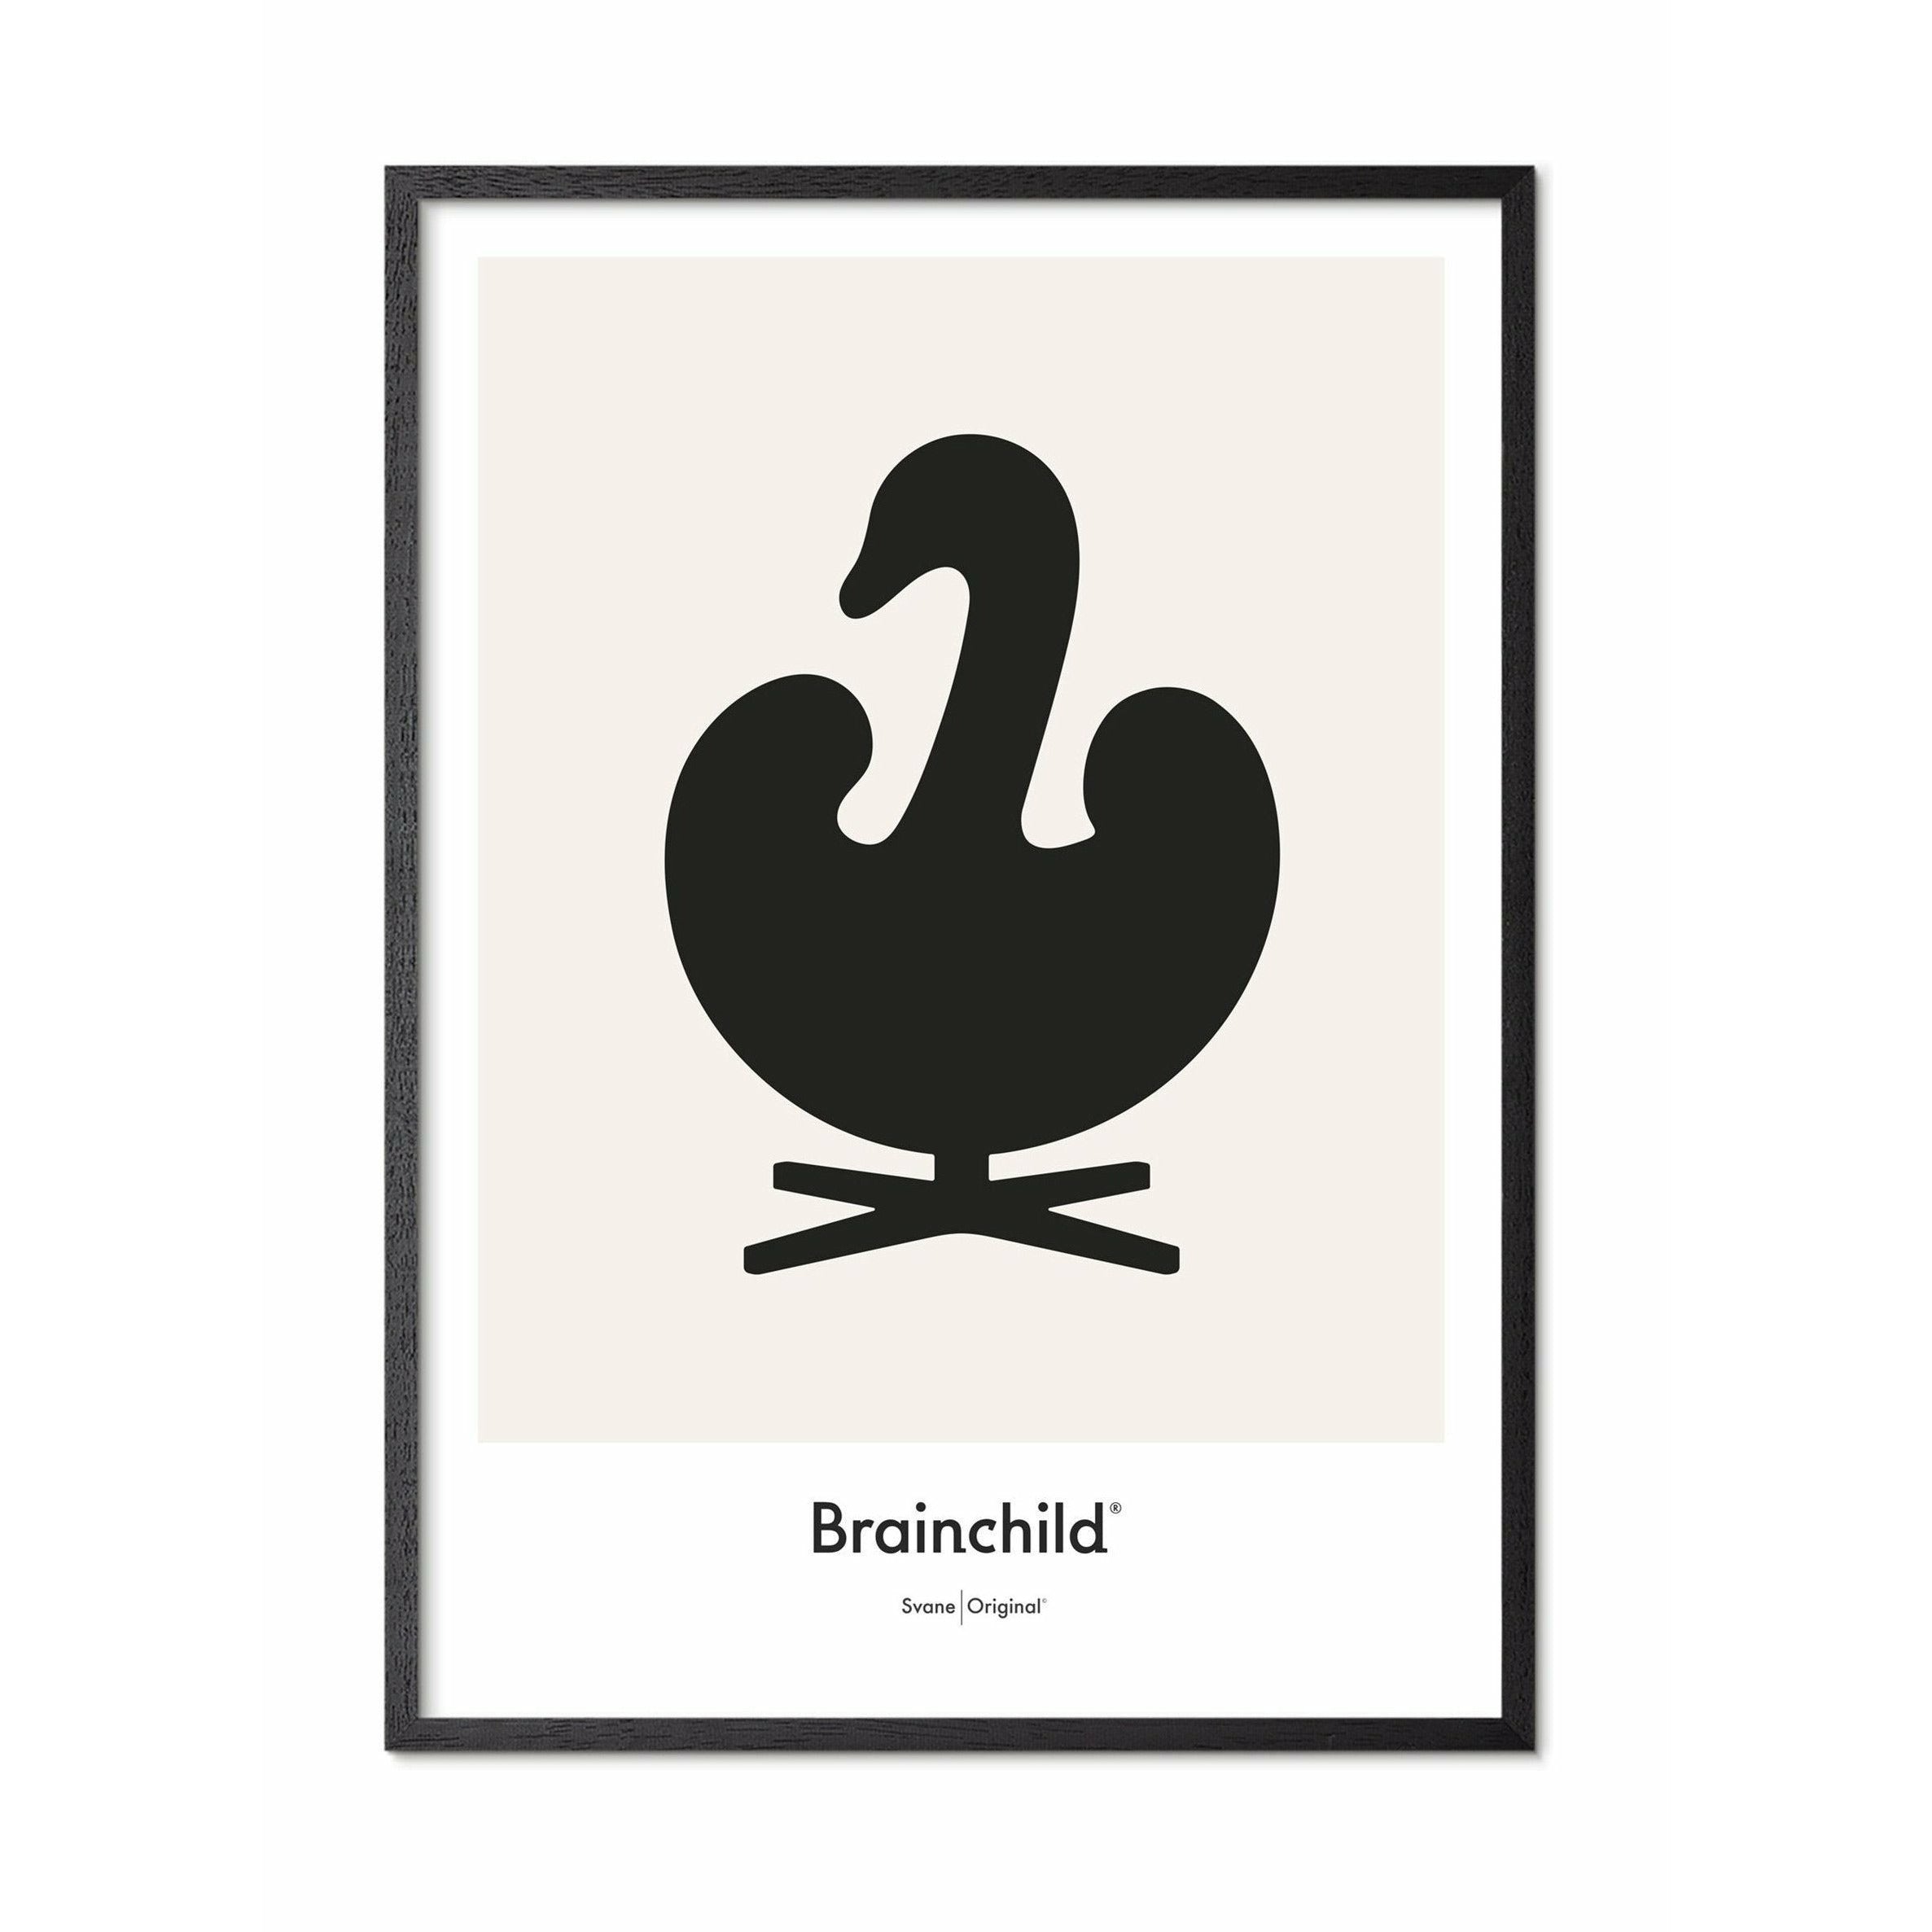 Brainchild Swan Design Icon Poster, Frame Made Of Black Lacquered Wood 50x70 Cm, Grey